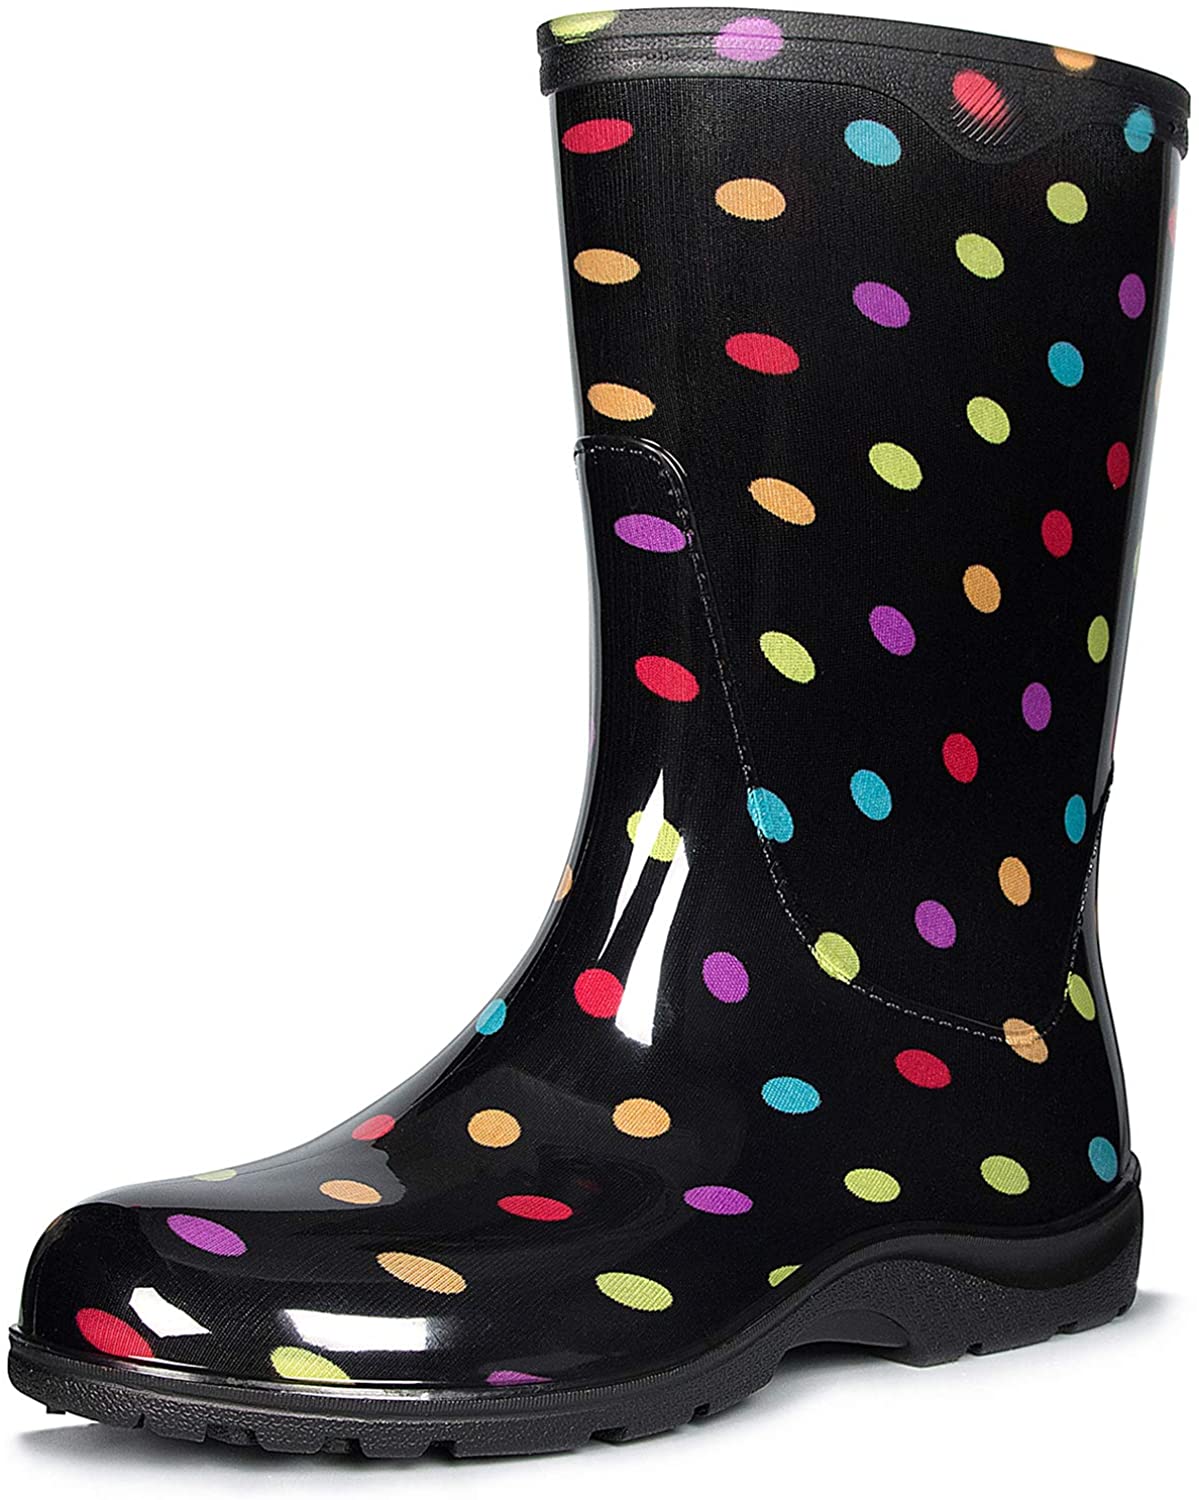 K KomForme Women's Waterproof Rain Boots Colorful Printed Mid-Calf Garden Shoes with Comfort Insole Ladies Short Rain Boots 